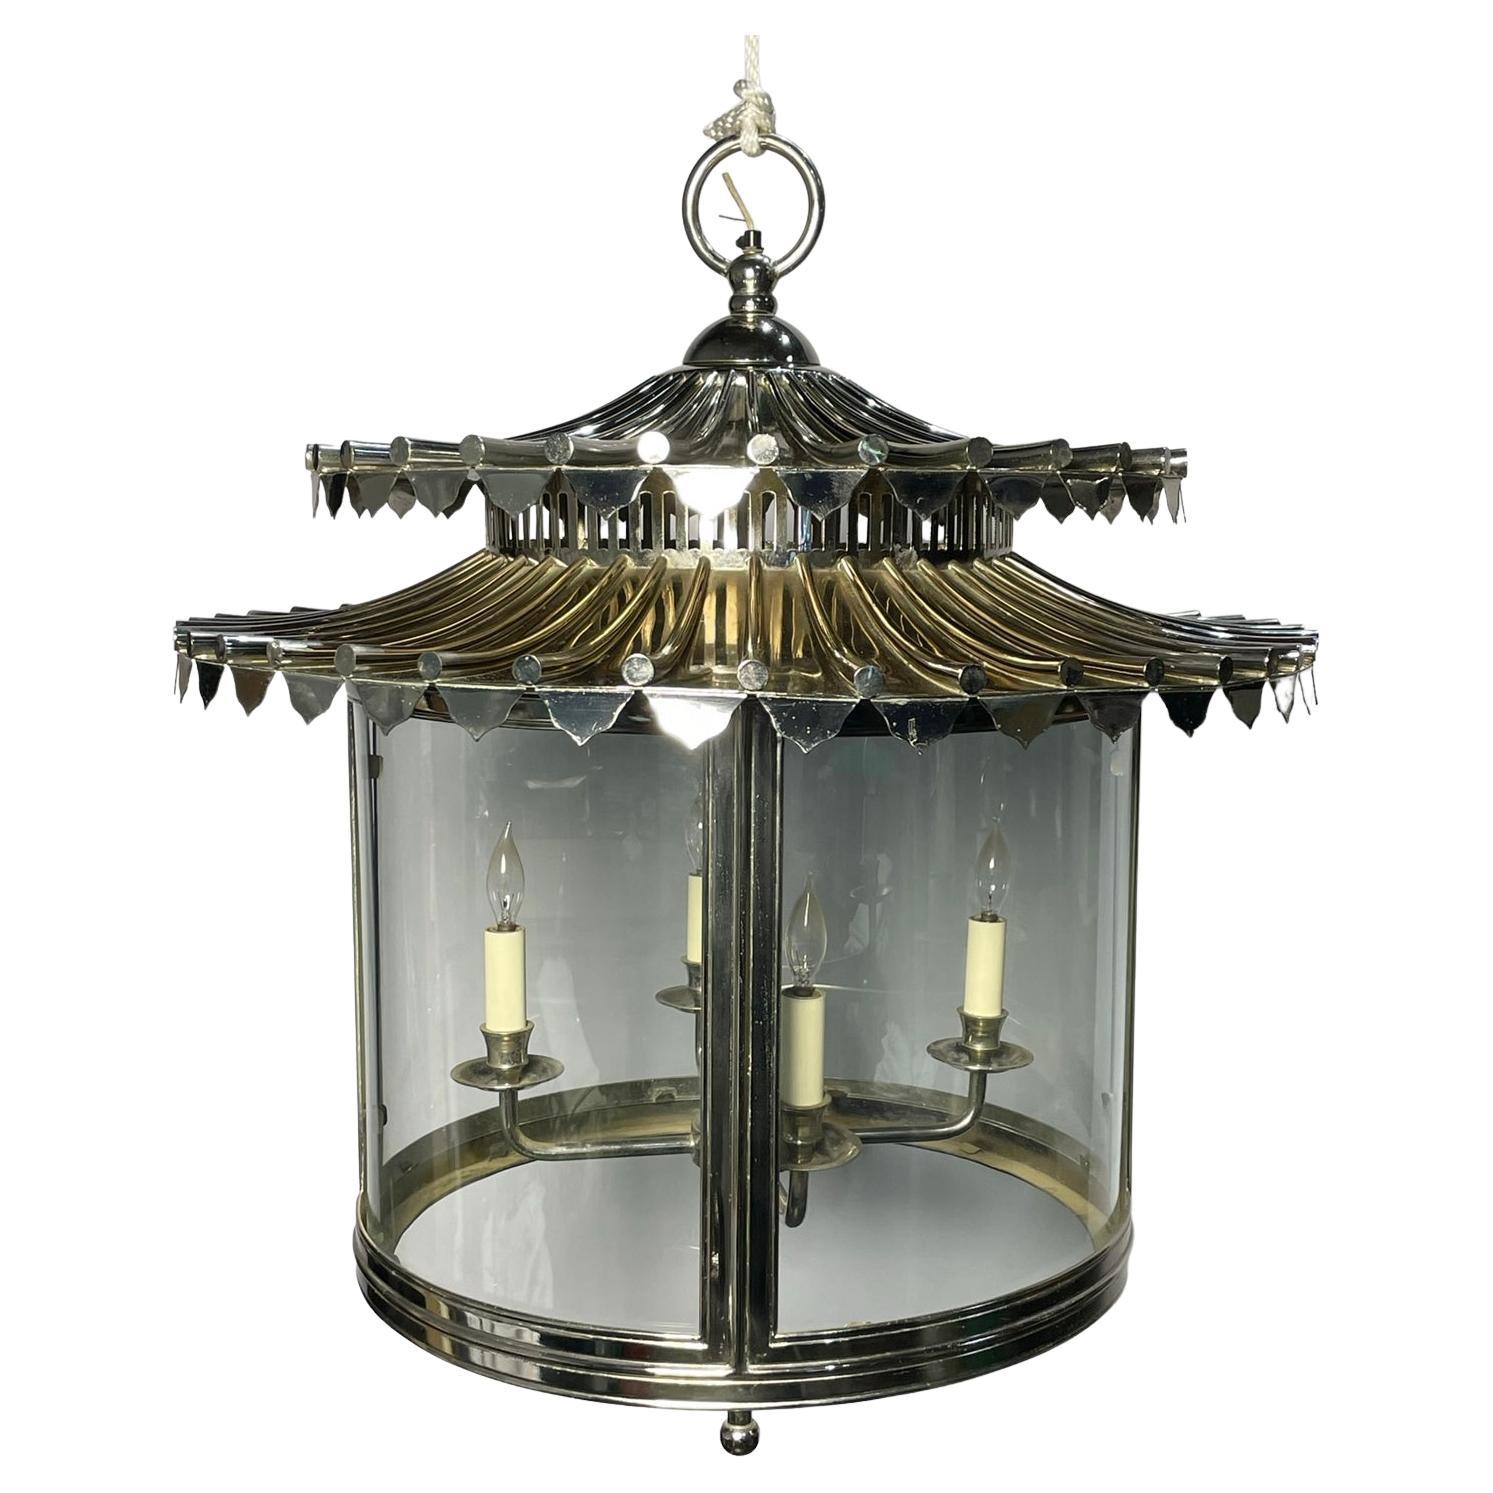 Nickel & Glass Chandelier Made in England by Charles Edwards